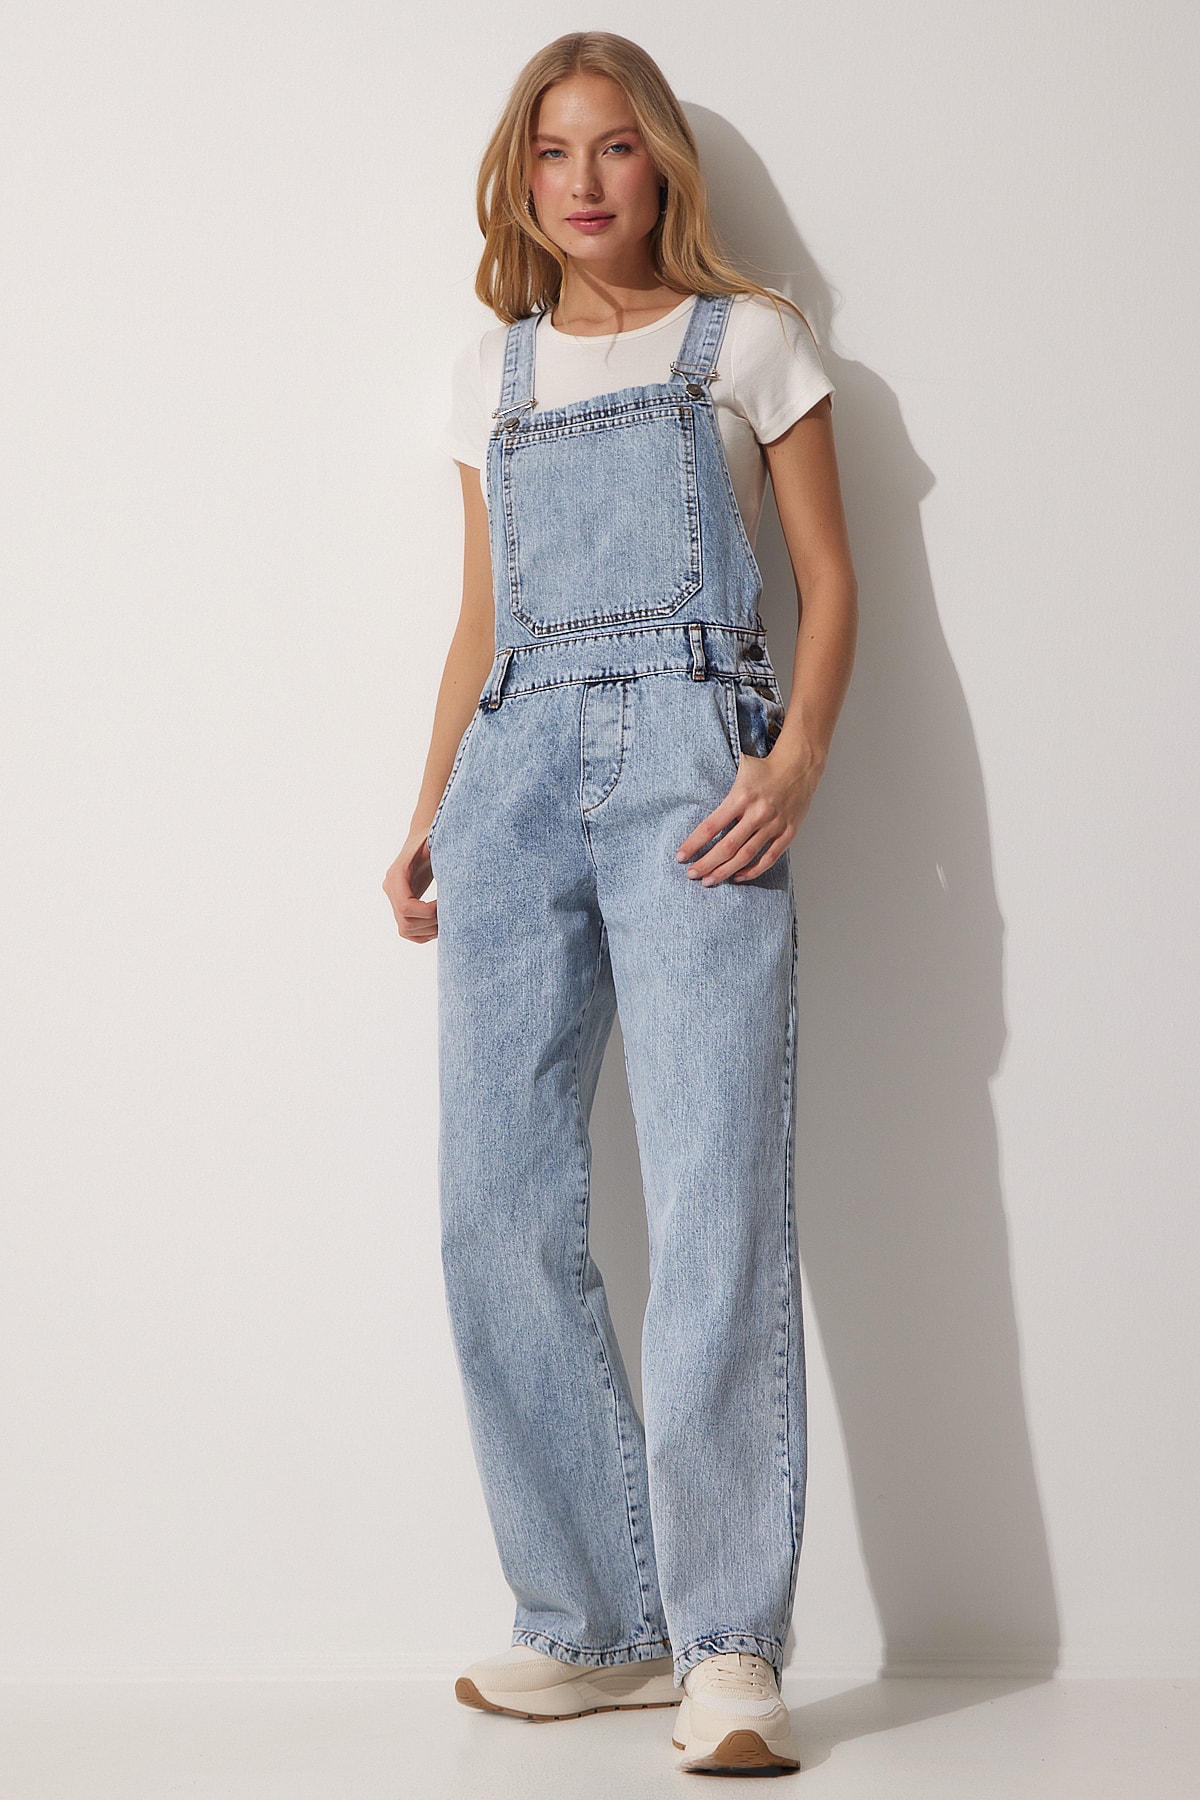 Happiness İstanbul Overalls - Blue - Regular fit